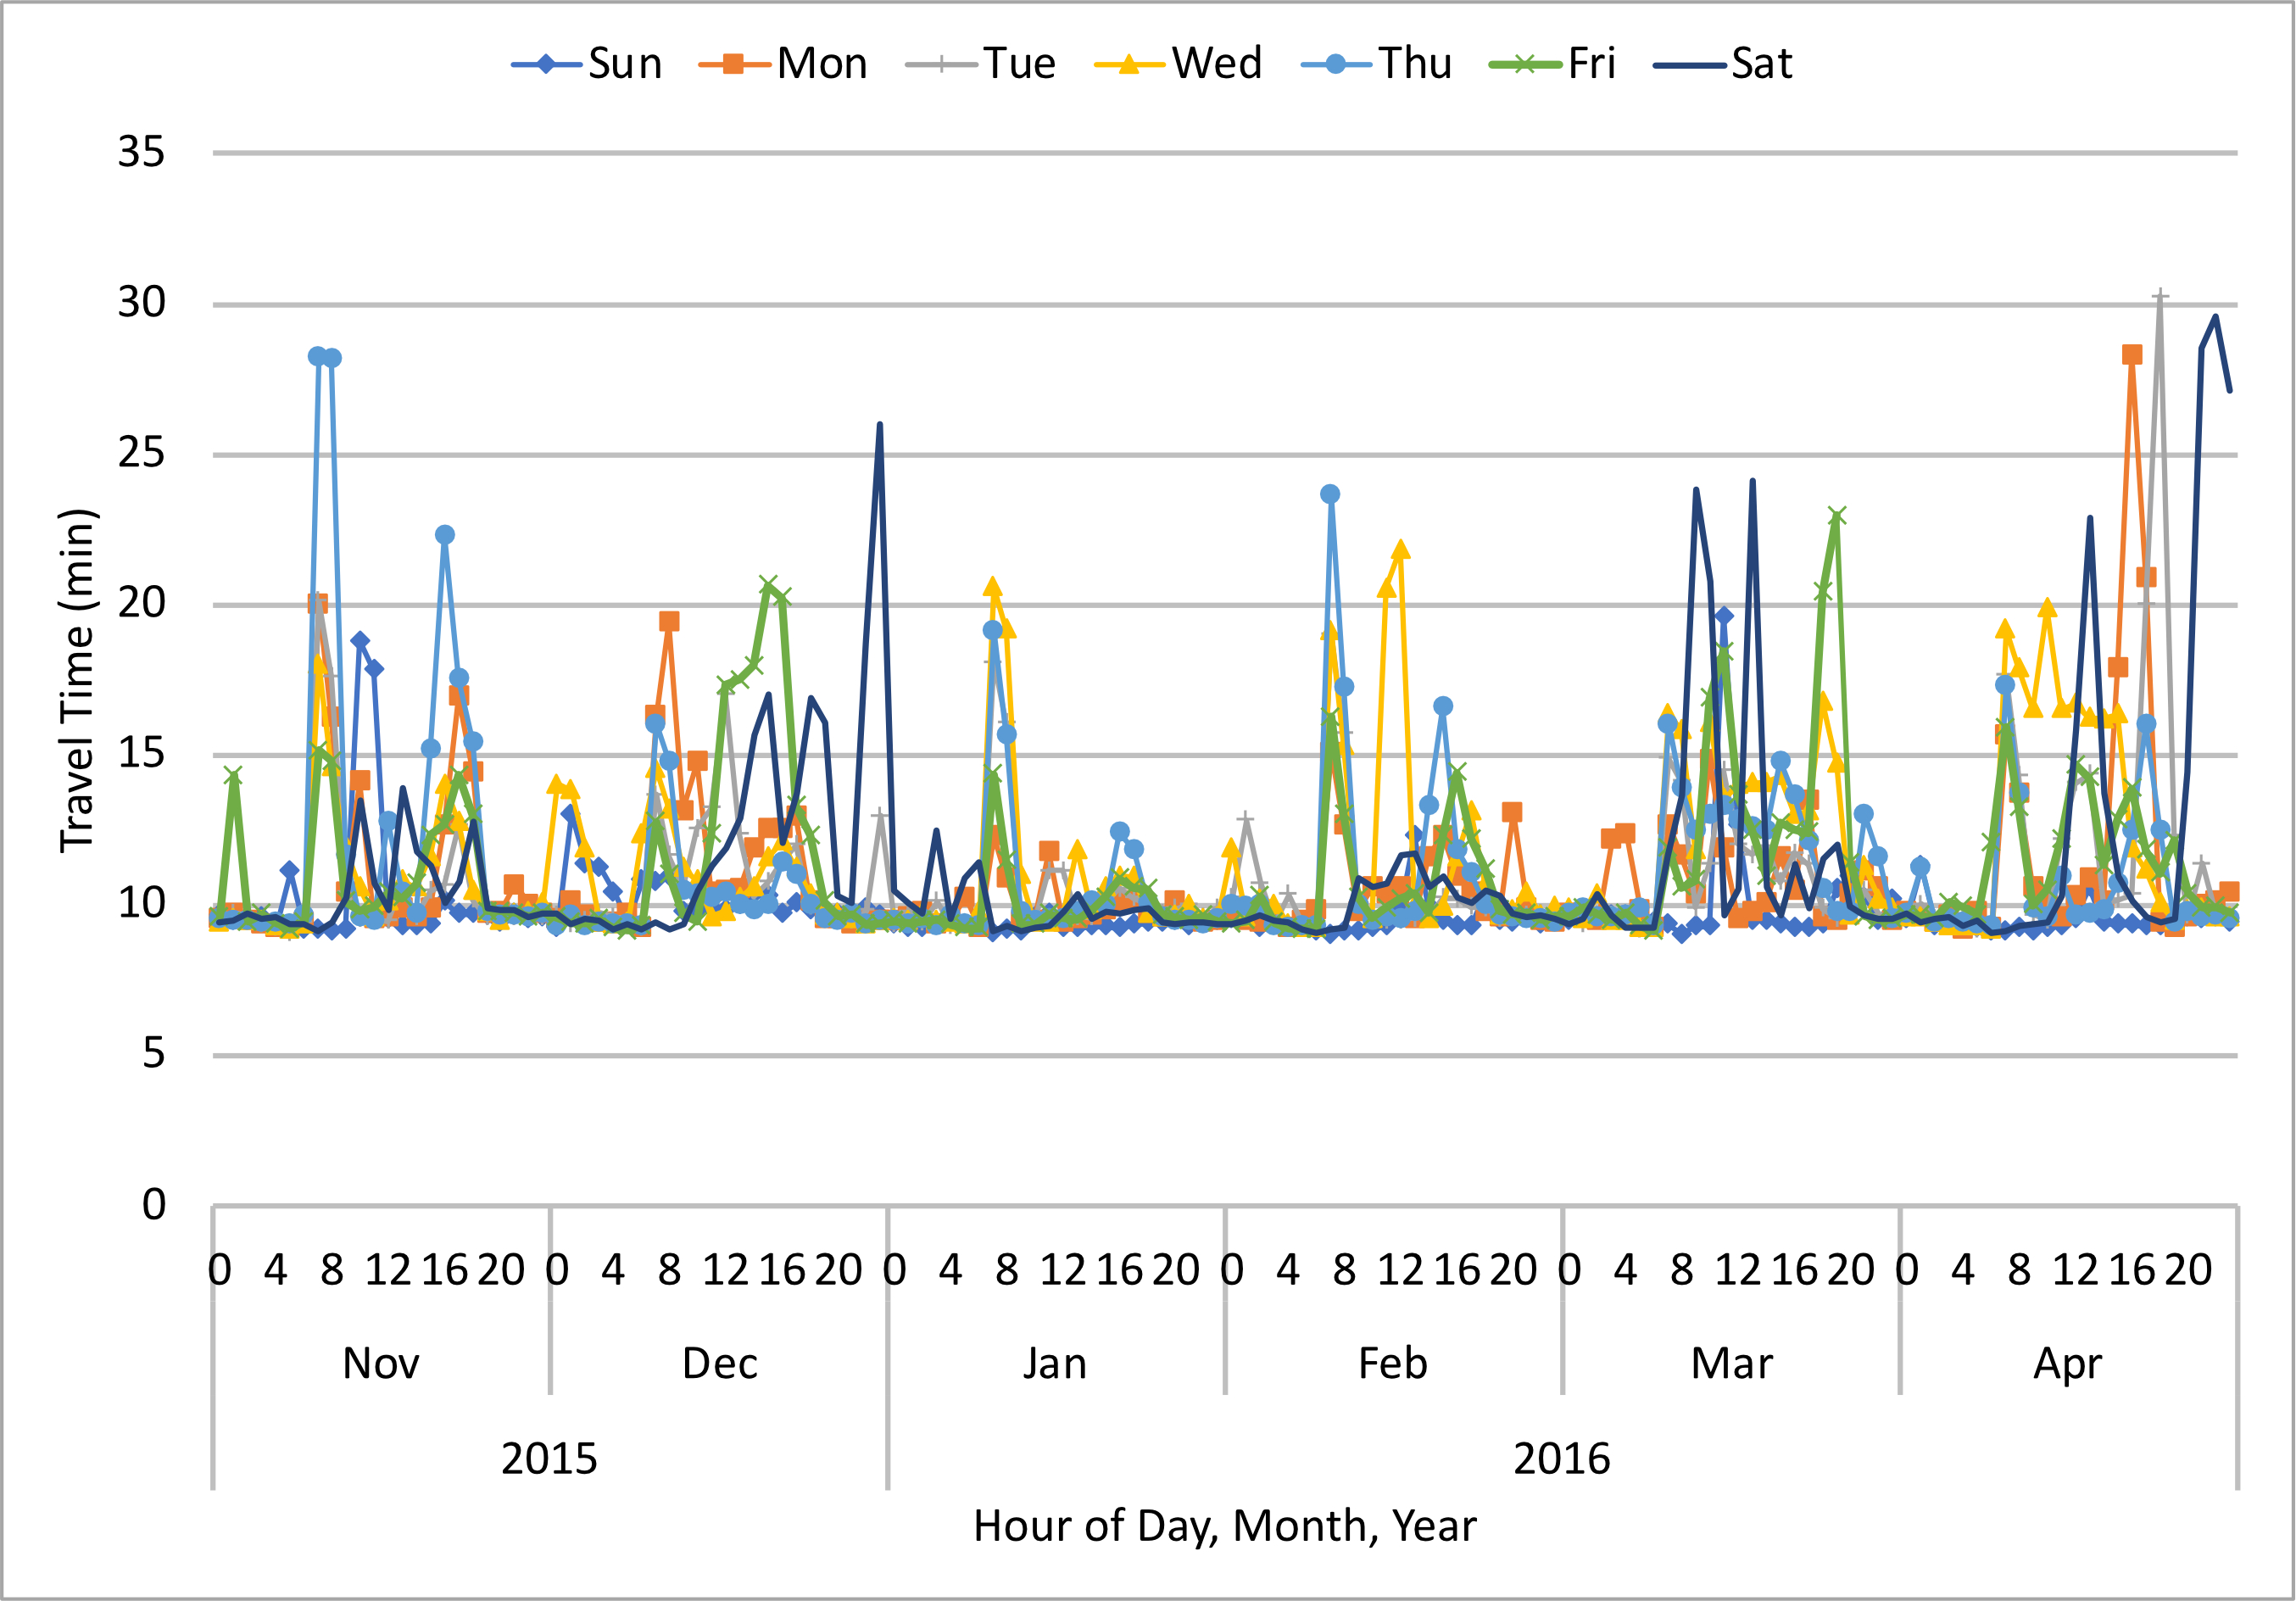 A line graph is shown for average travel time by day of week and hour of day for each month between November and April. Units are in minutes.  Travel times range from about 10 to 30, with most of them between 10 and 15.  Travel times are lowest in January and highest in April. 